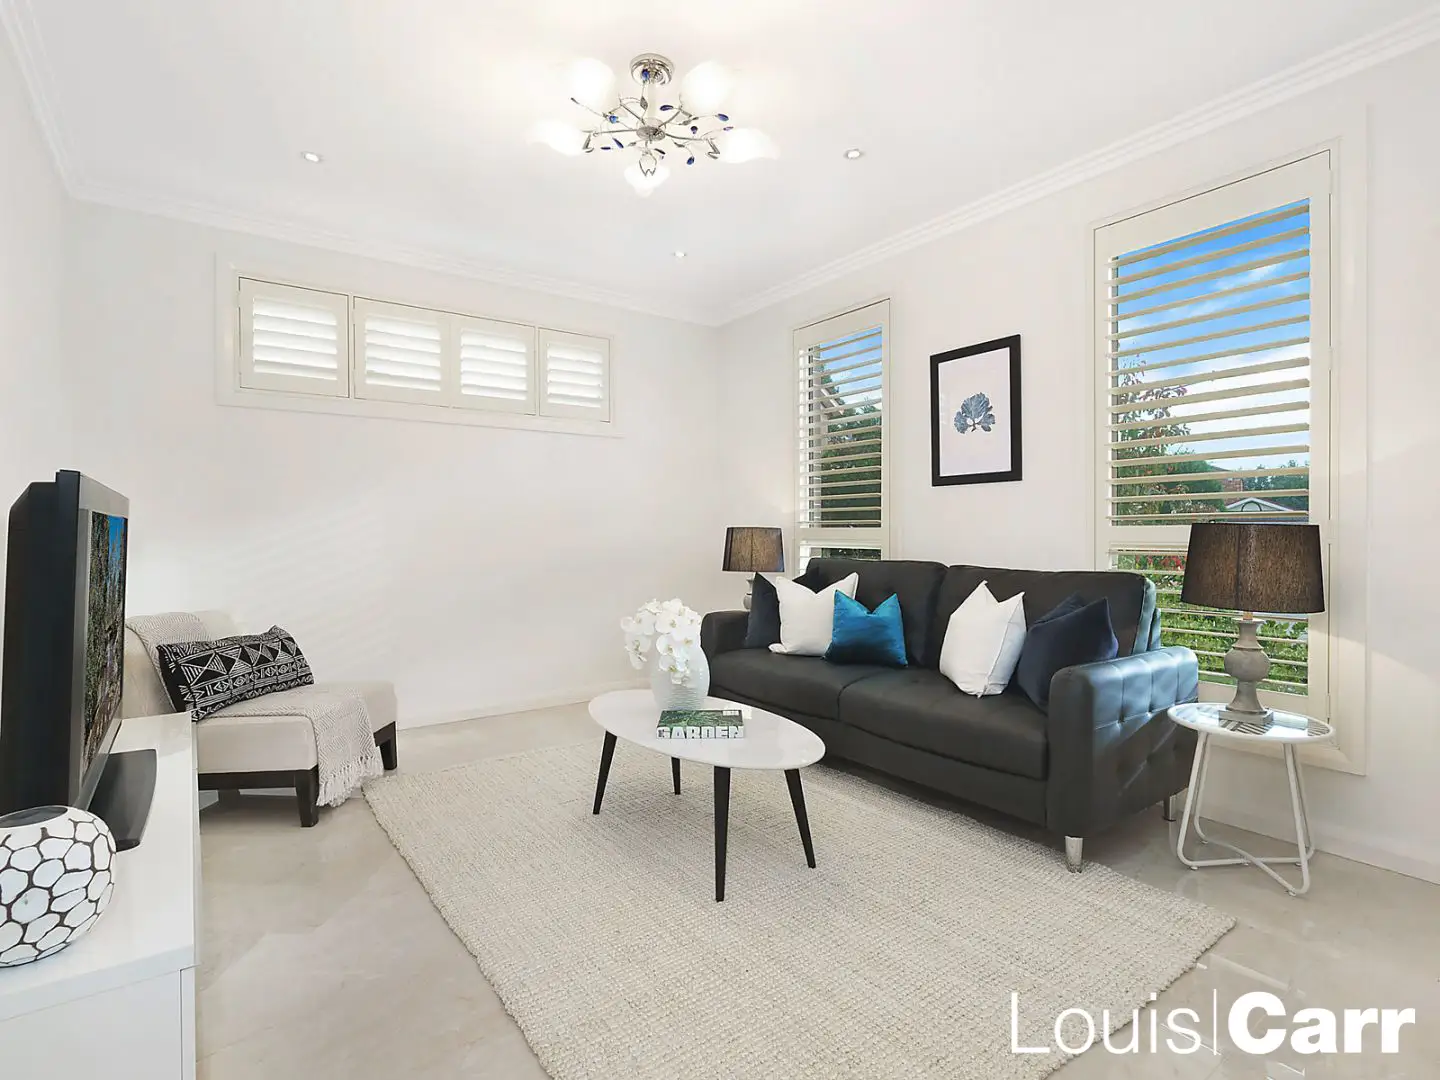 Photo #8: 22 Blundell Circuit, Kellyville - Sold by Louis Carr Real Estate